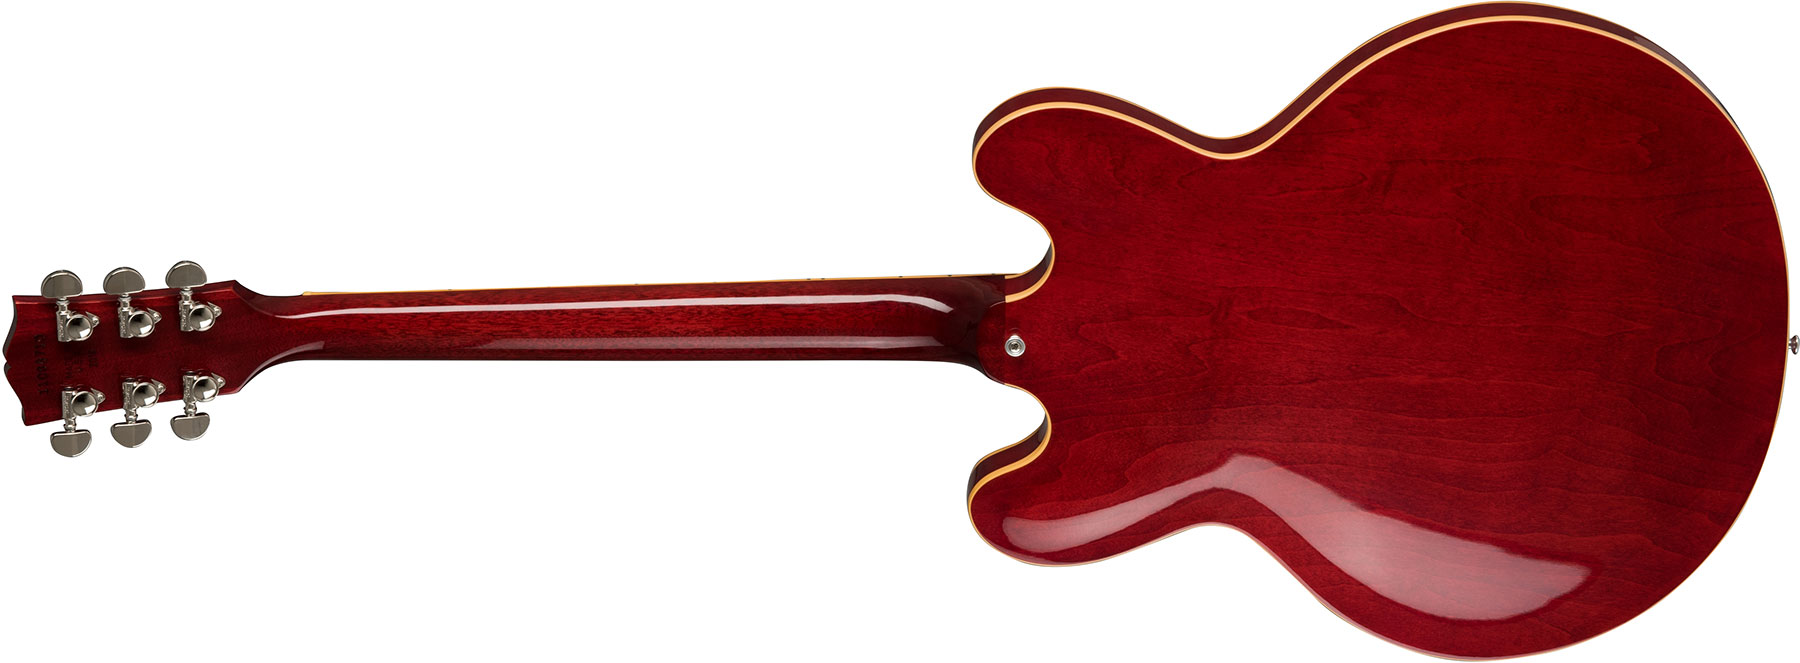 Gibson Es-335 Dot 2019 Hh Ht Rw - Antique Faded Cherry - Semi-hollow electric guitar - Variation 2